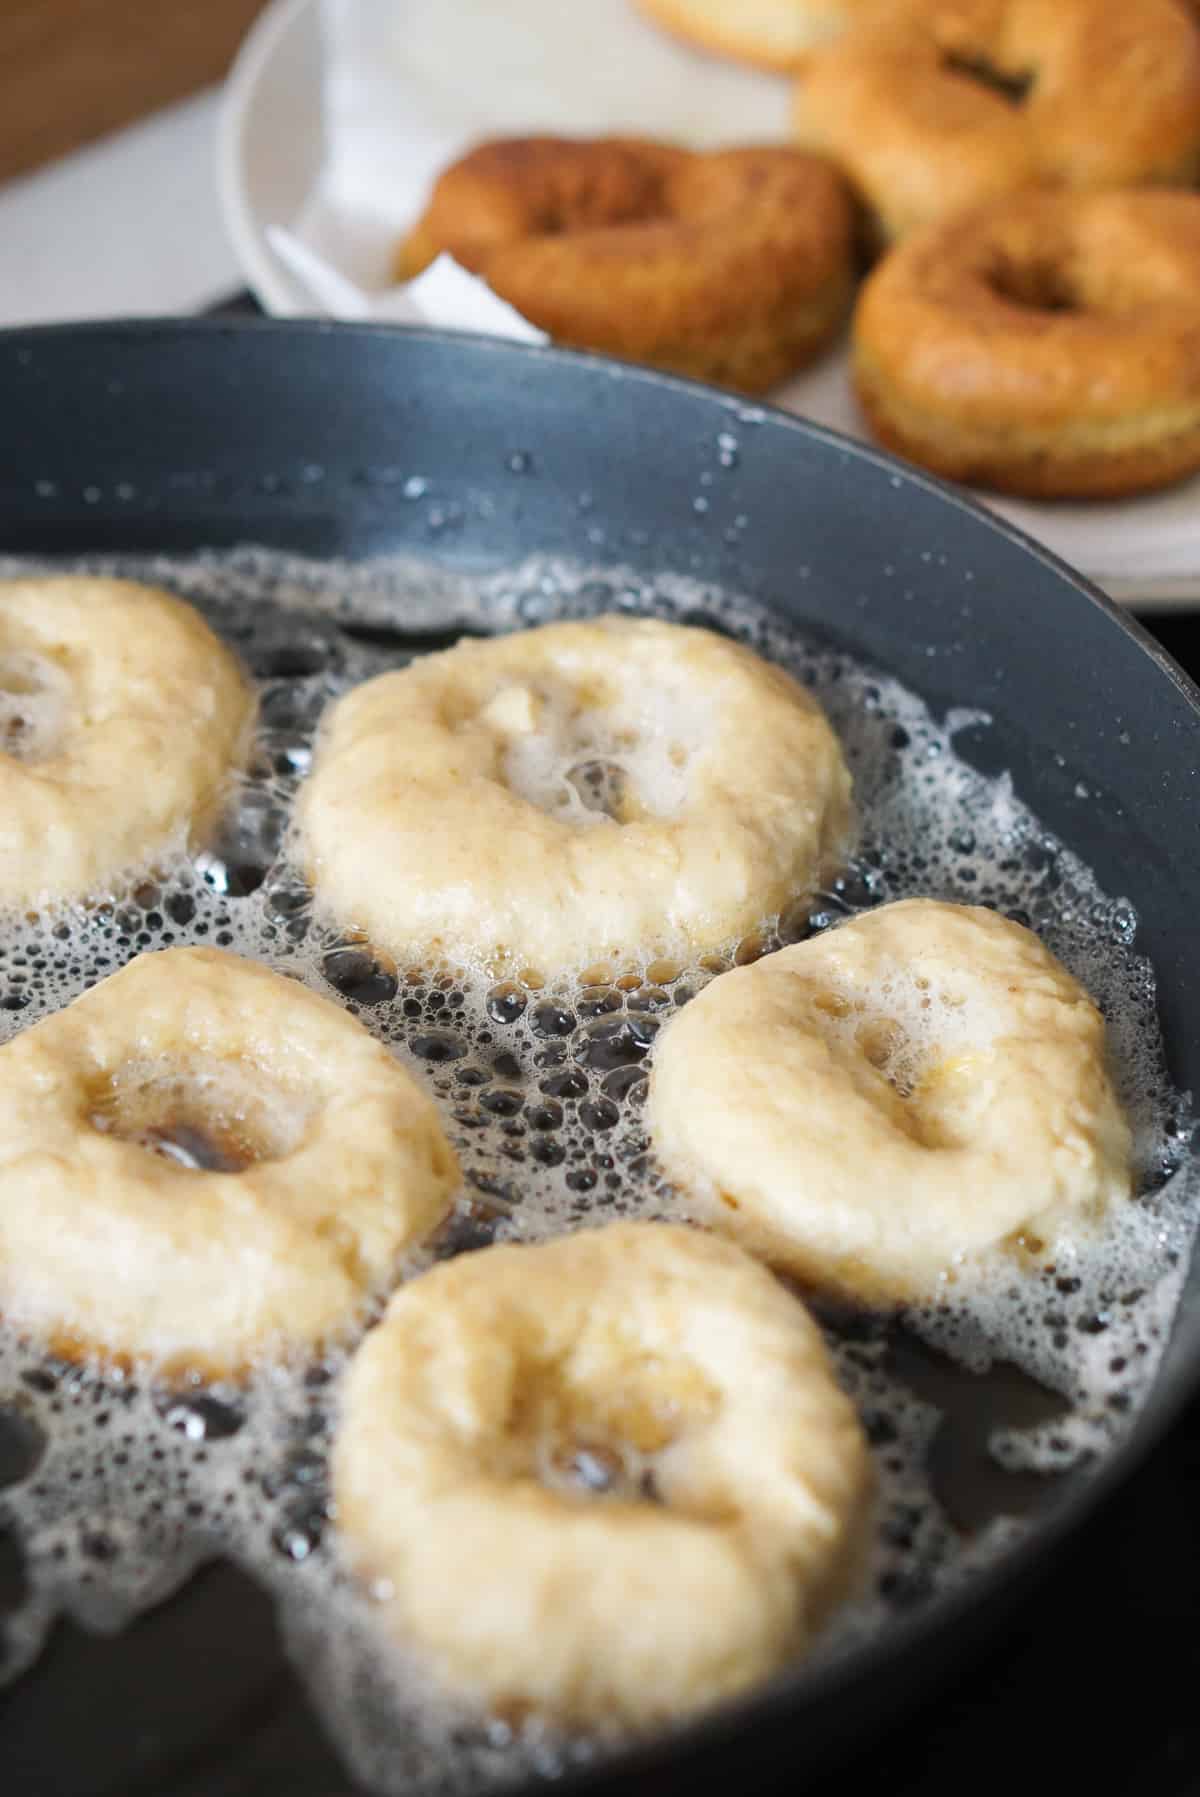 Donuts frying in a cast iron skillet.